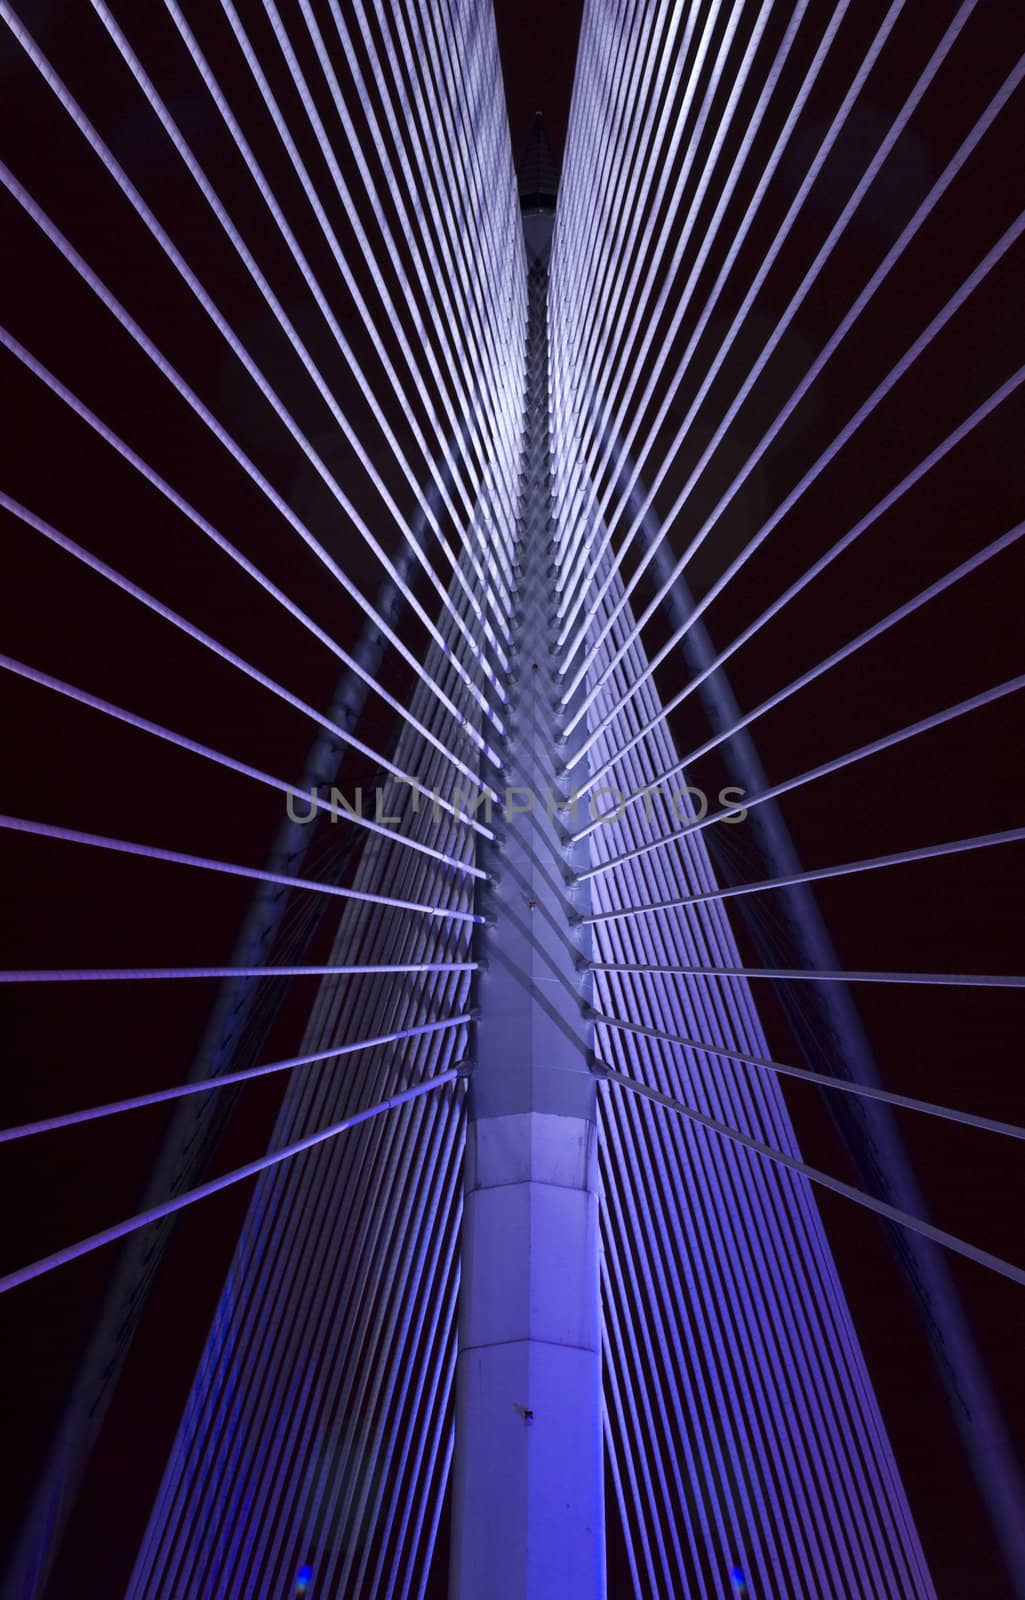 Abstract view of a suspension bridge 

